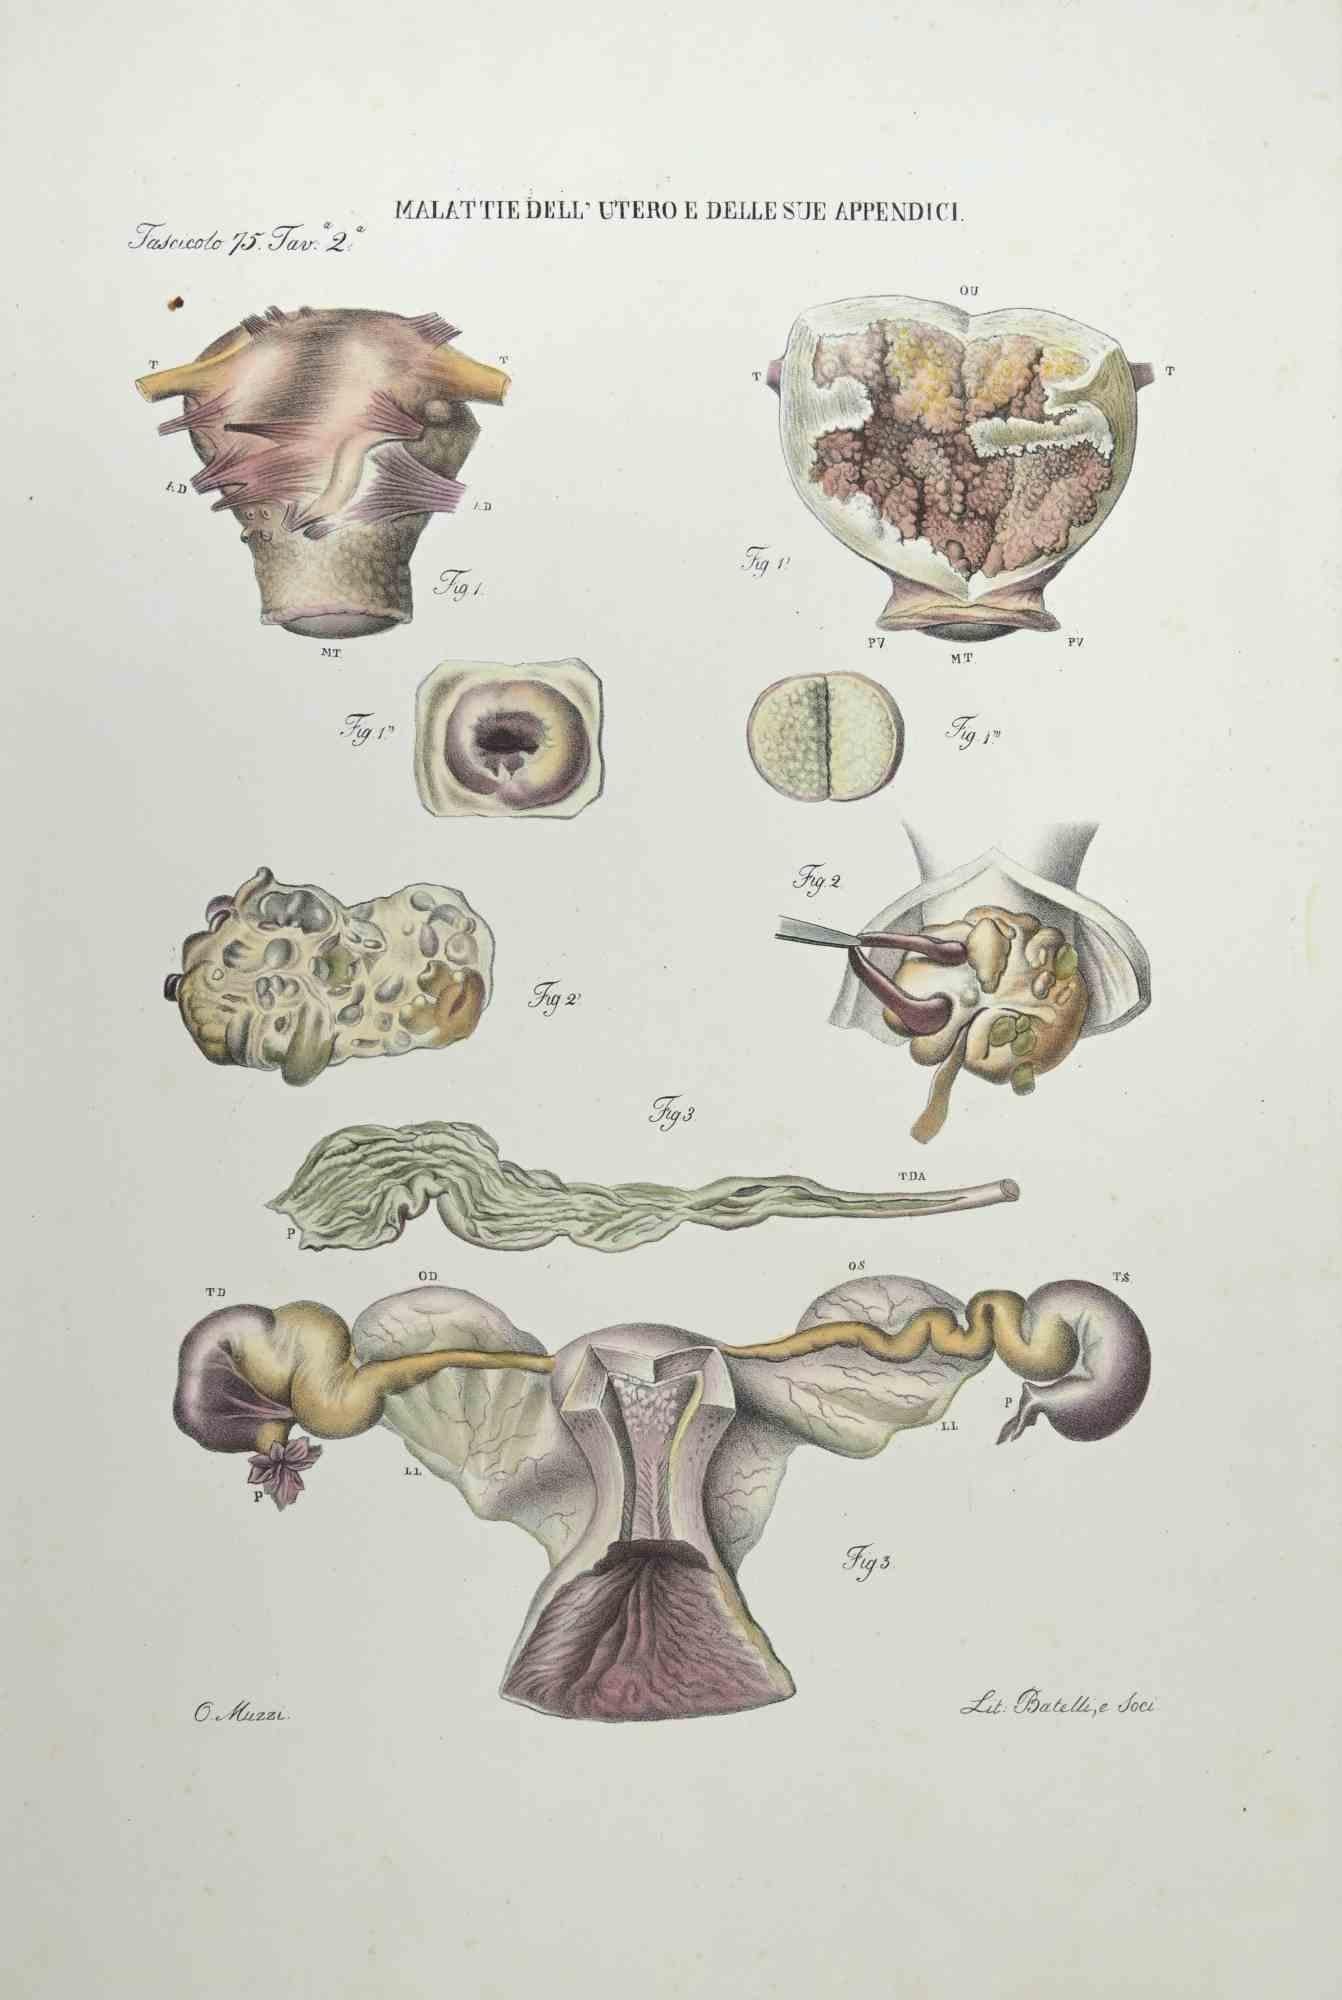 Diseases of the Uterus and its Appendages is a lithograph hand colored by Ottavio Muzzi for the edition of Antoine Chazal,Human Anatomy, Printers Batelli and Ridolfi, realized in 1843.

Signed on plate on the lower left margin.

The artwork belongs